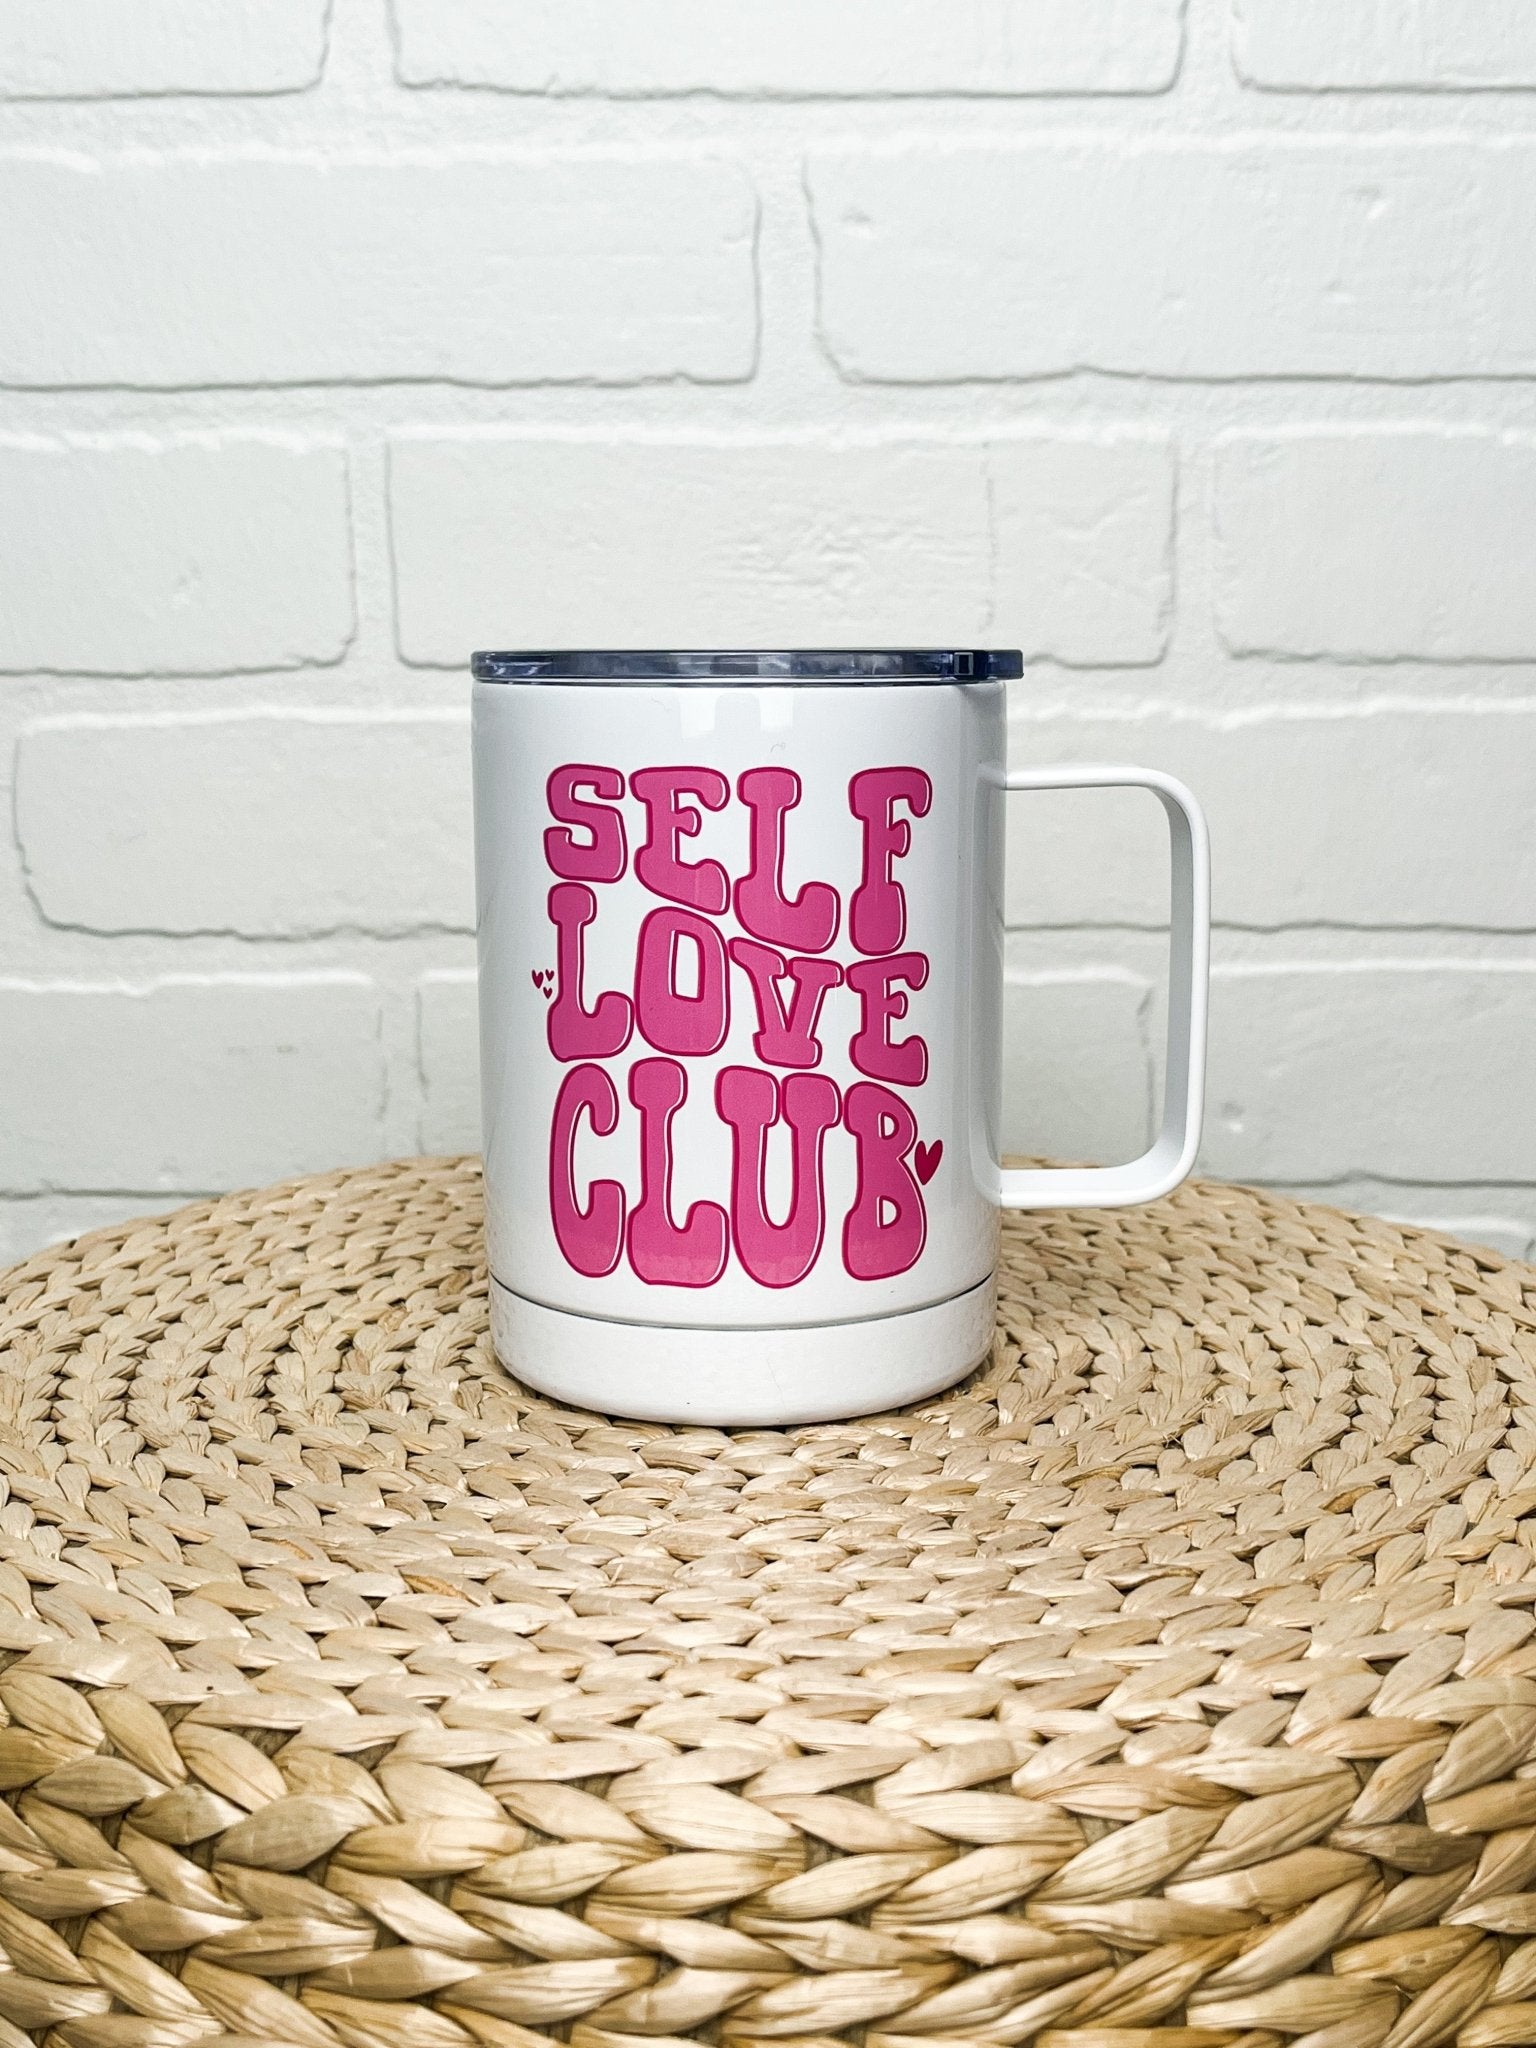 Mugsby Self love club travel cup - Trendy Tumblers, Mugs and Cups at Lush Fashion Lounge Boutique in Oklahoma City